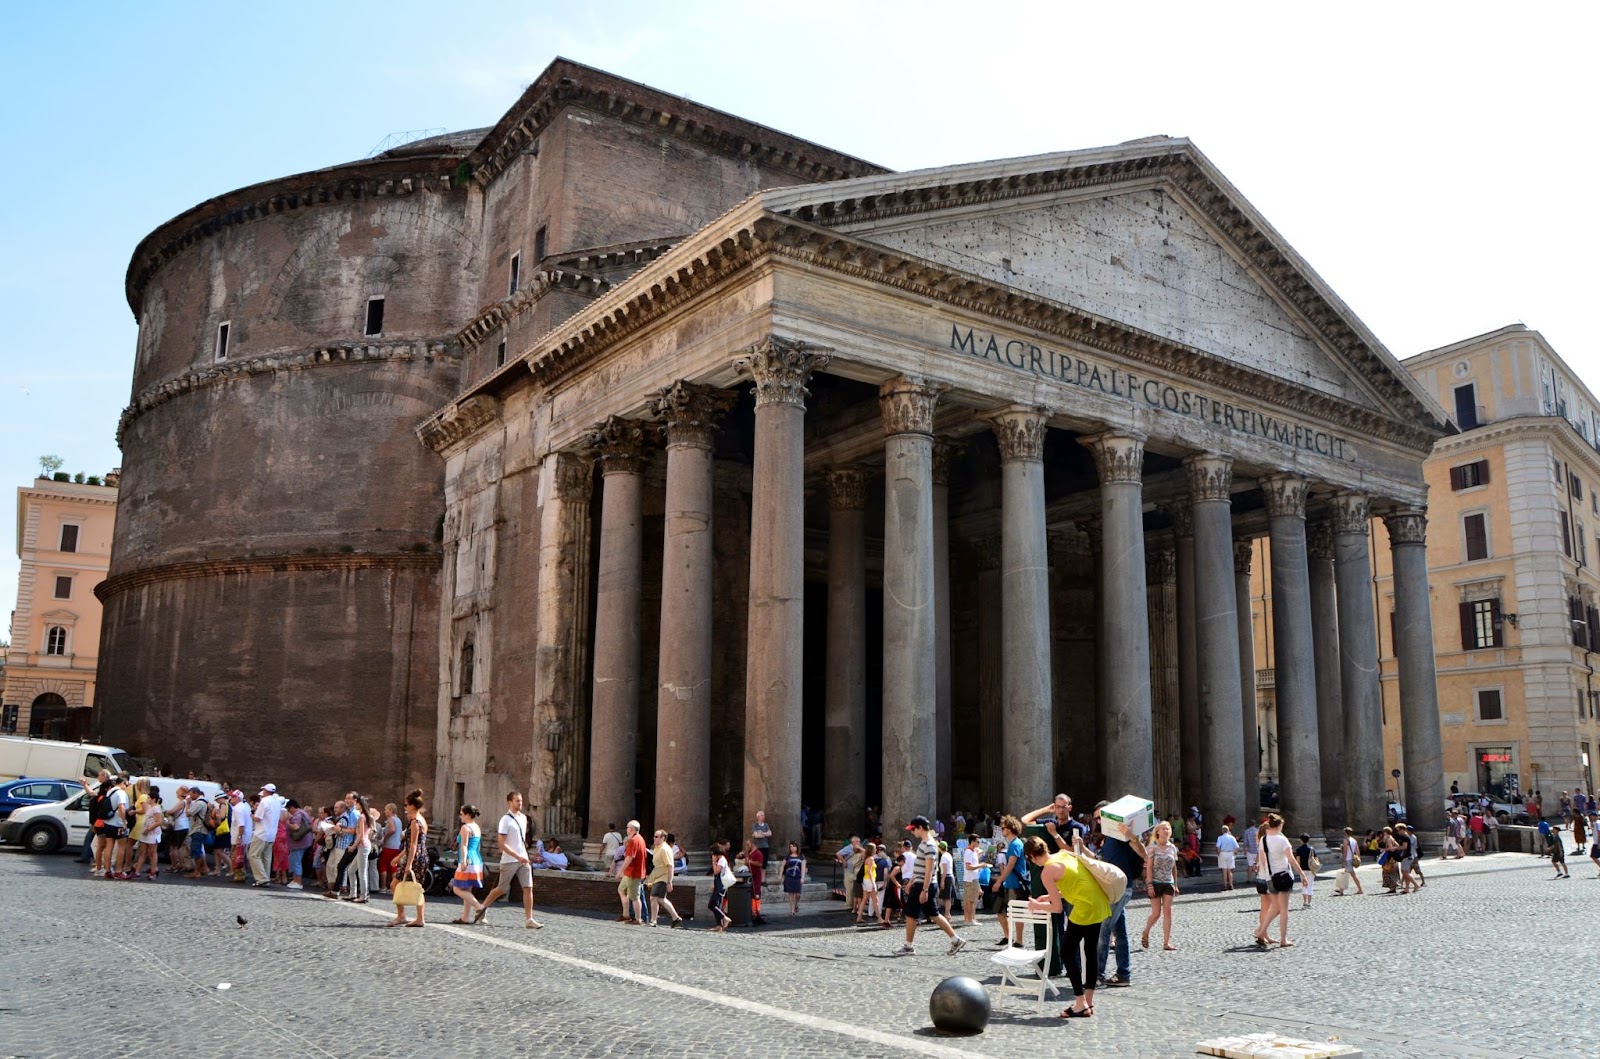 The Pantheon- The first of all Roman temples